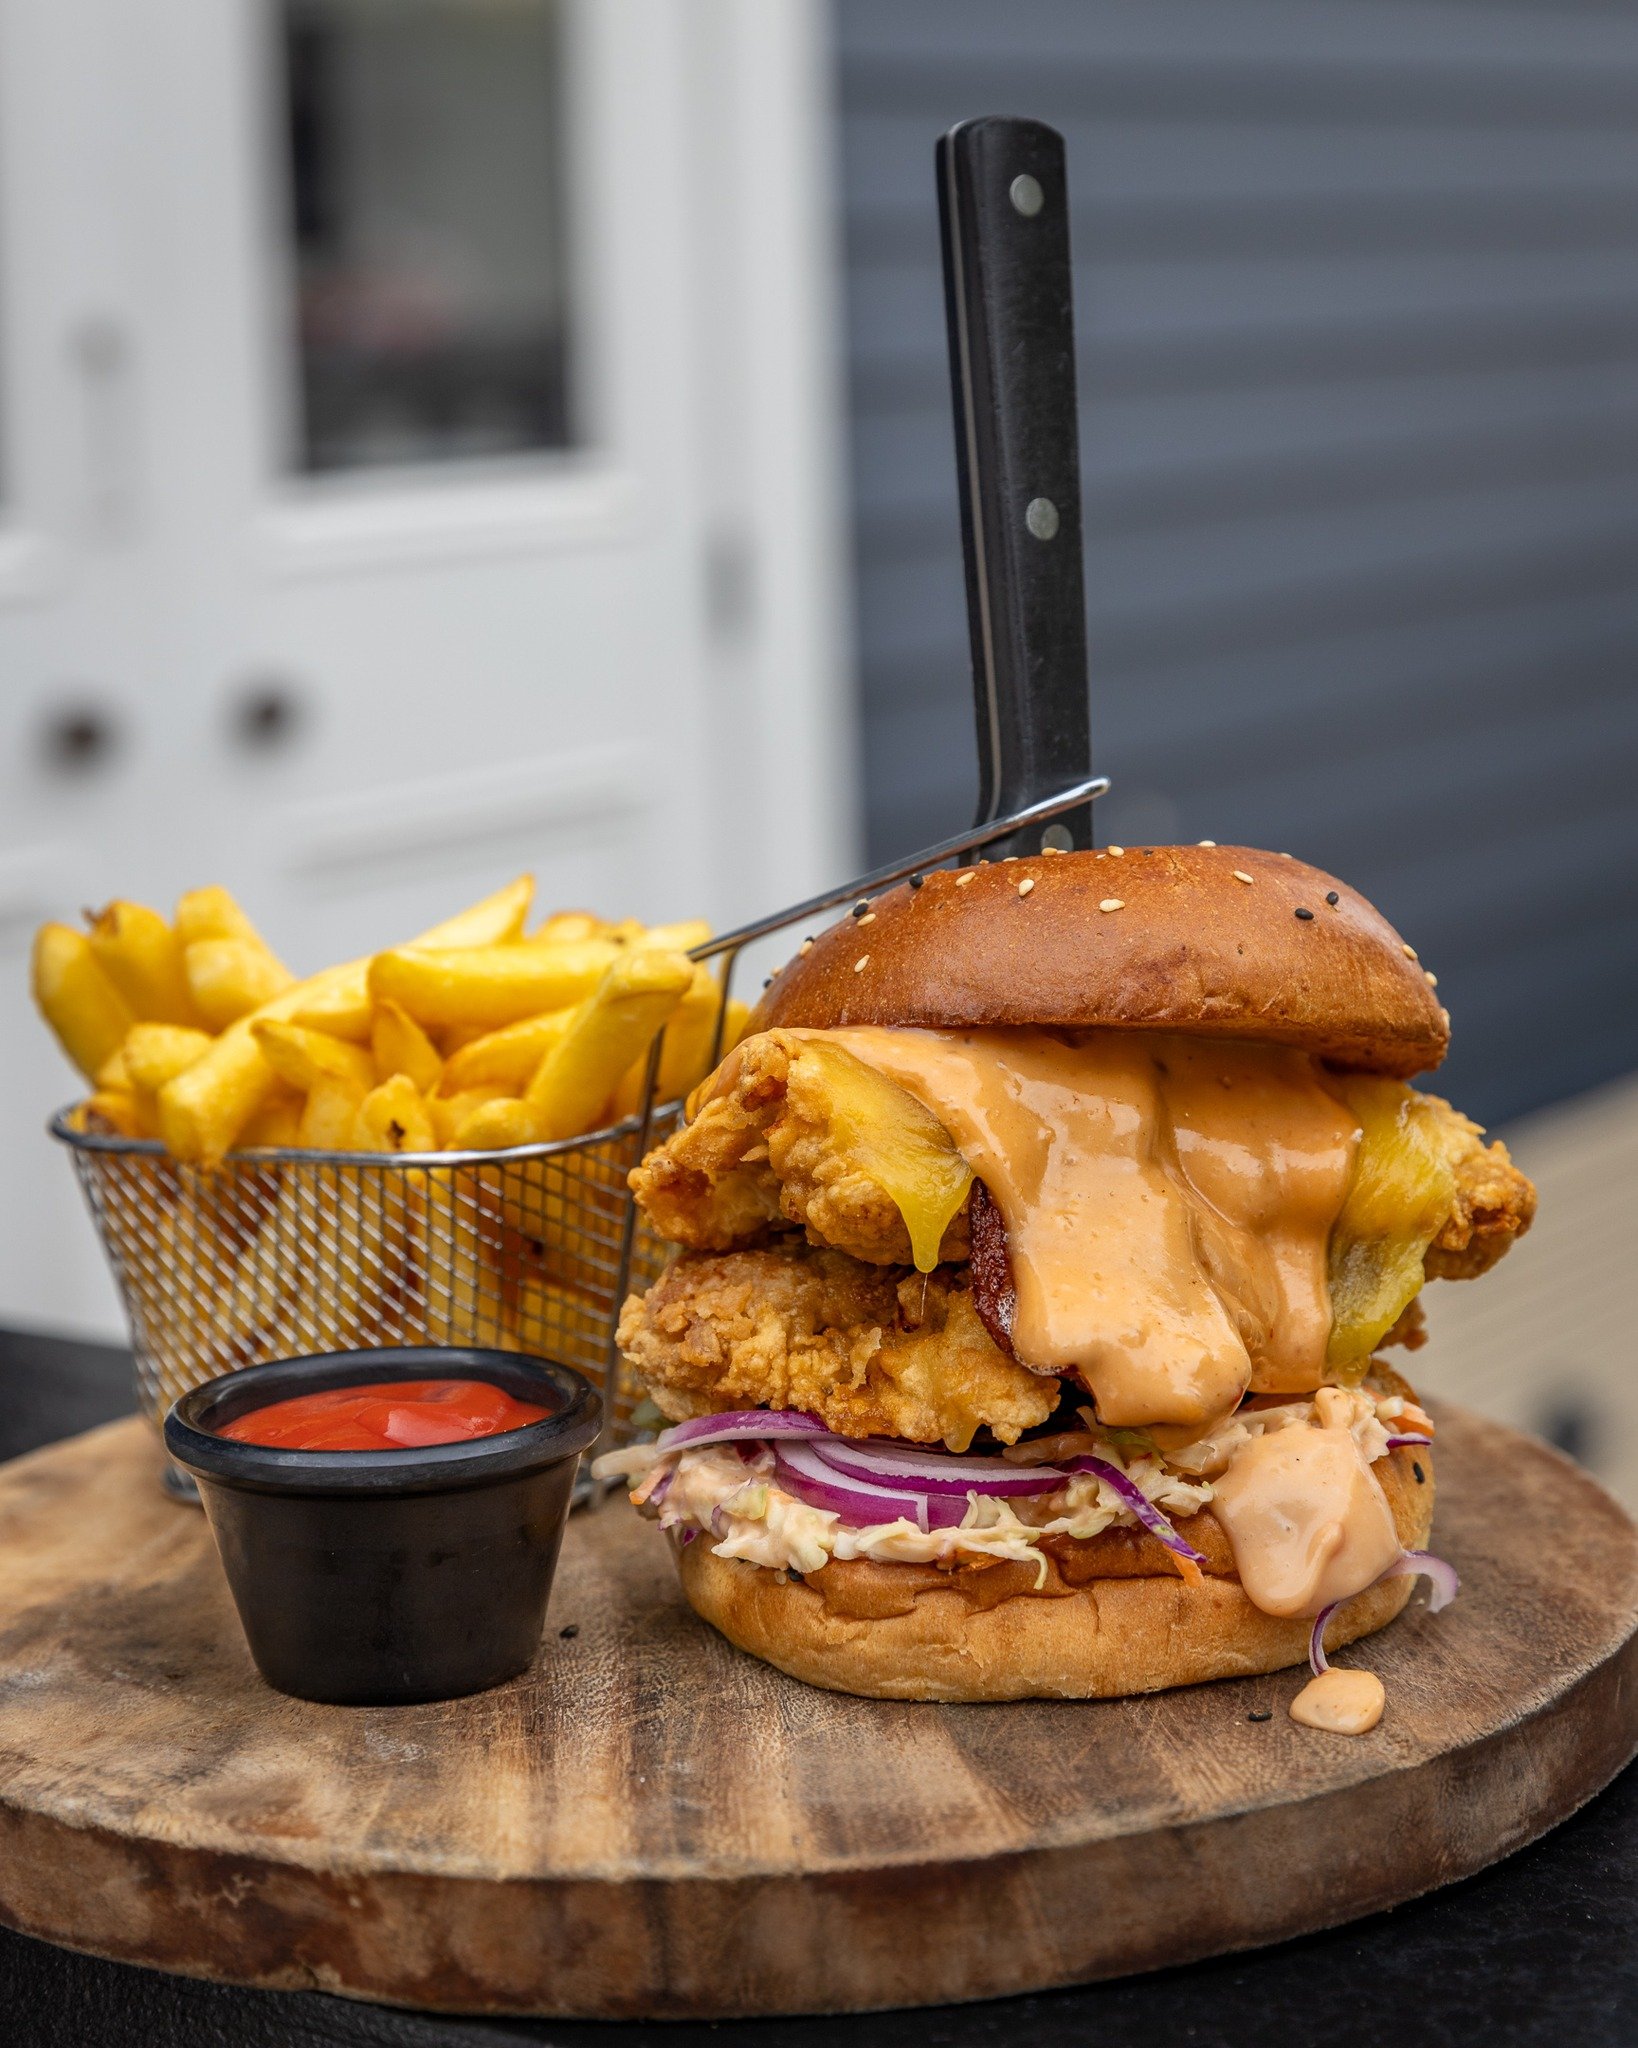 Make sure you're hungry if you're hitting up the Chur Chur Chicken Burger! 🤩

Golden buttermilk fried chicken fillet with streaky bacon, pickles, red onion, American cheddar cheese, coleslaw and homemade sriracha aioli 🍗 Served with fries 🍟

Only 